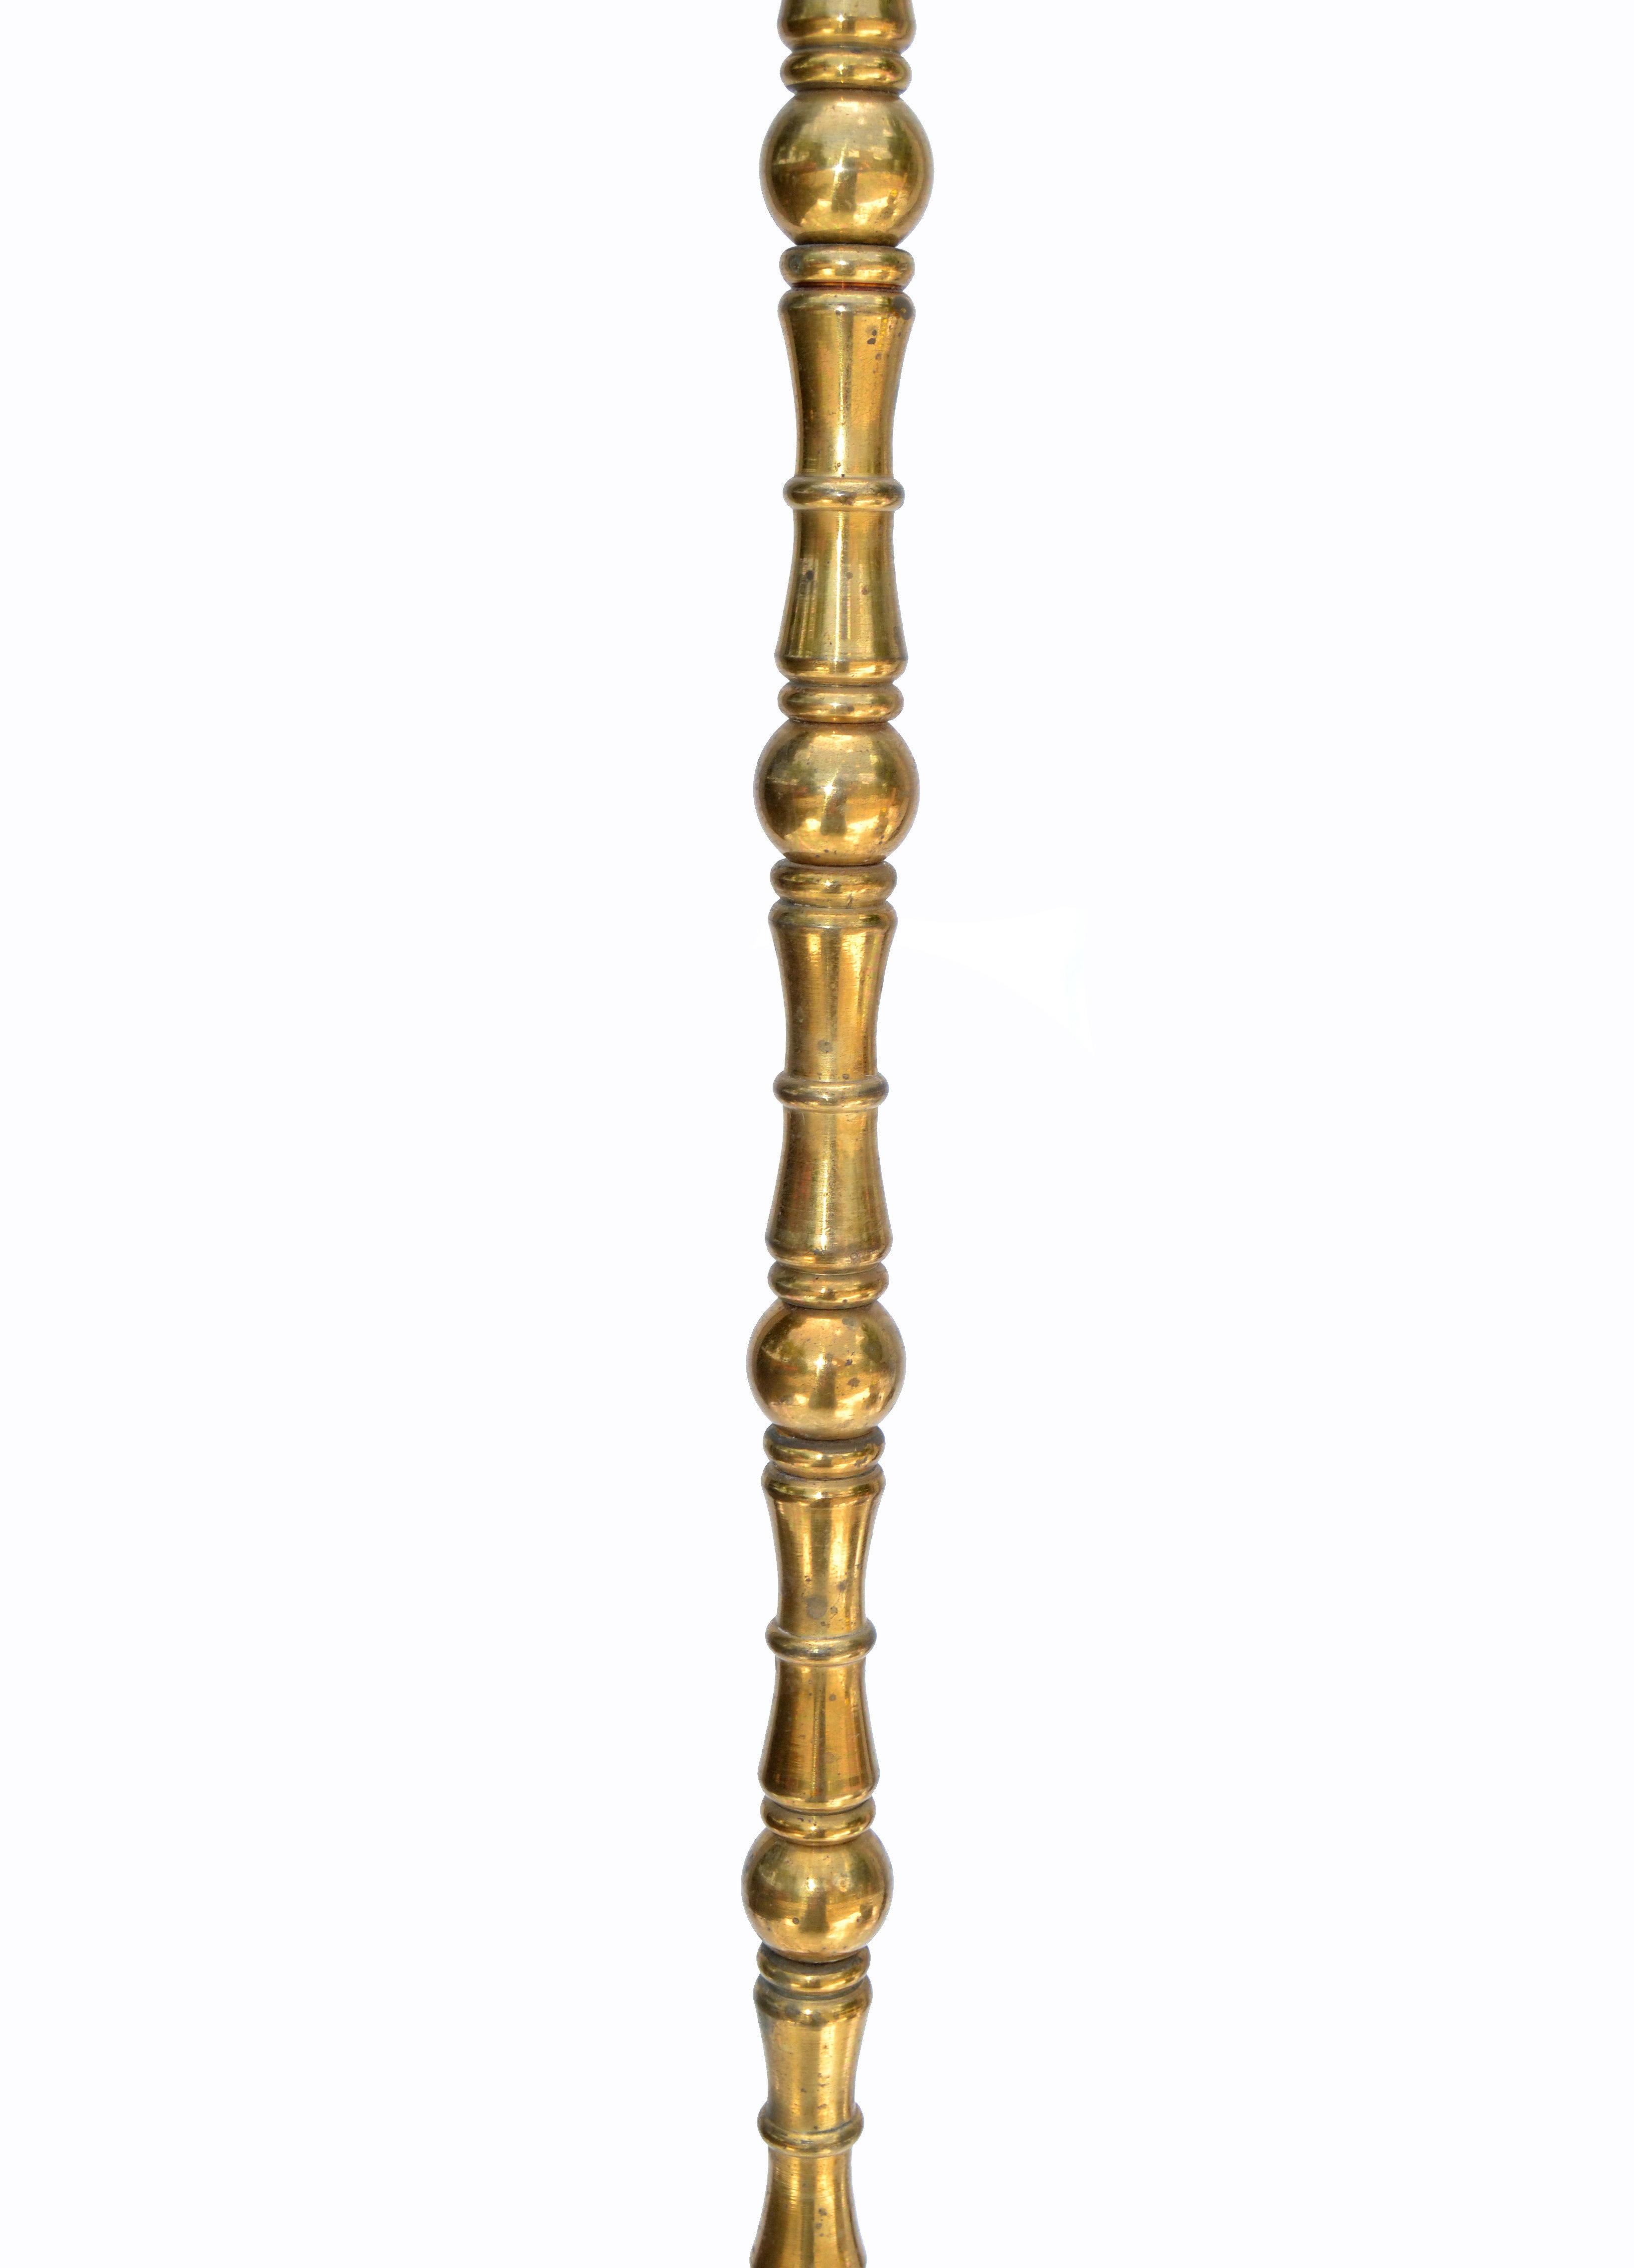 Neoclassical Maison Baguès bronze bamboo style floor lamp made in France in the 1950s.
. 75 watts.
Classic and elegant as well as practical.
Note: No Shade.